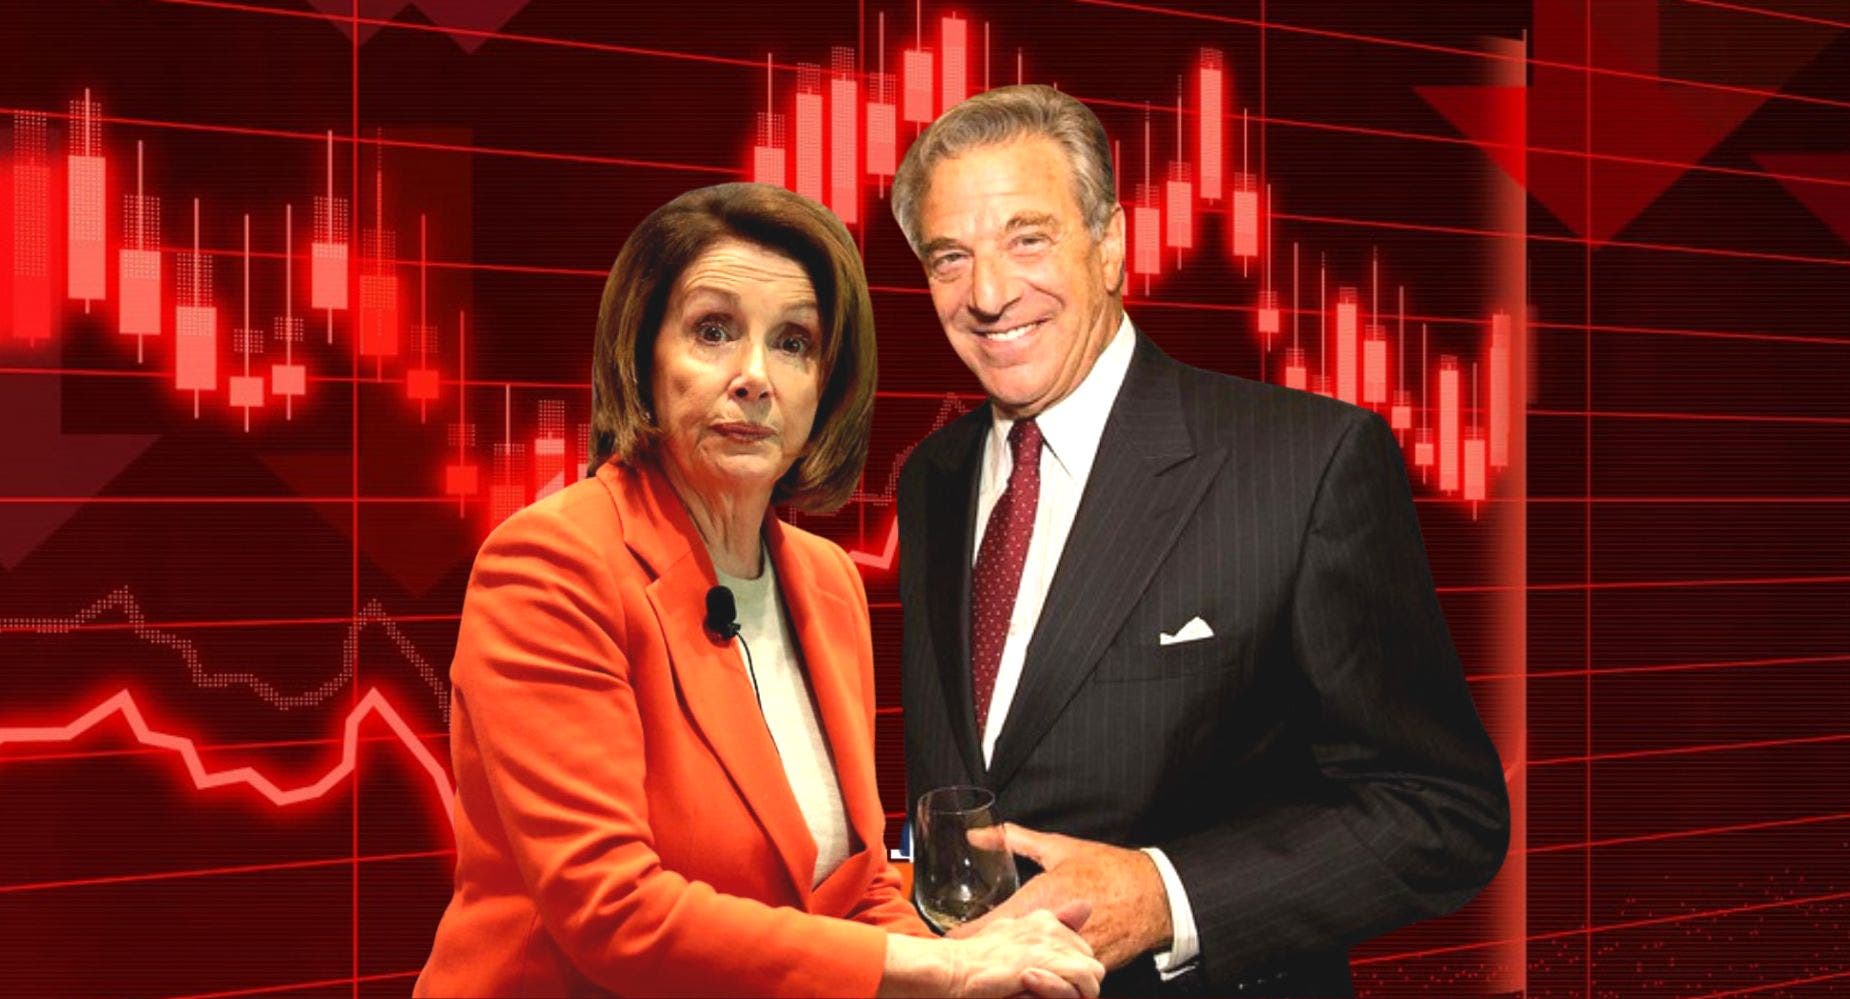 Nancy Pelosi And Husband Sell NVIDIA Corp Stock After Public Pressure: Here's How Much She Lost And What's Next